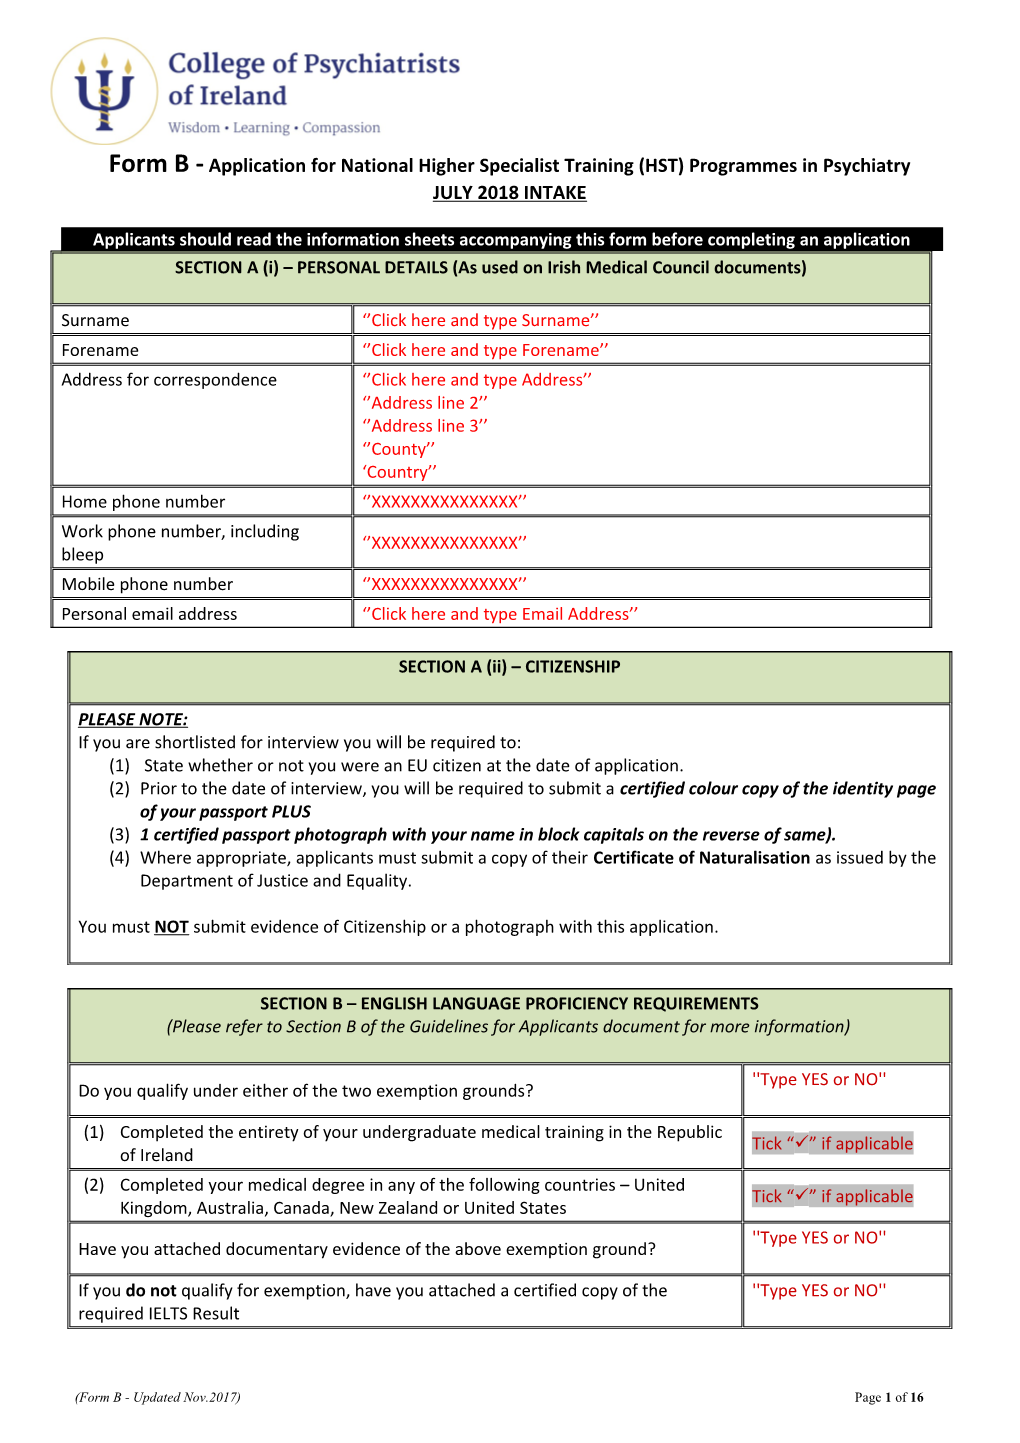 Form B -Application for National Higher Specialist Training (HST) Programmes in Psychiatry